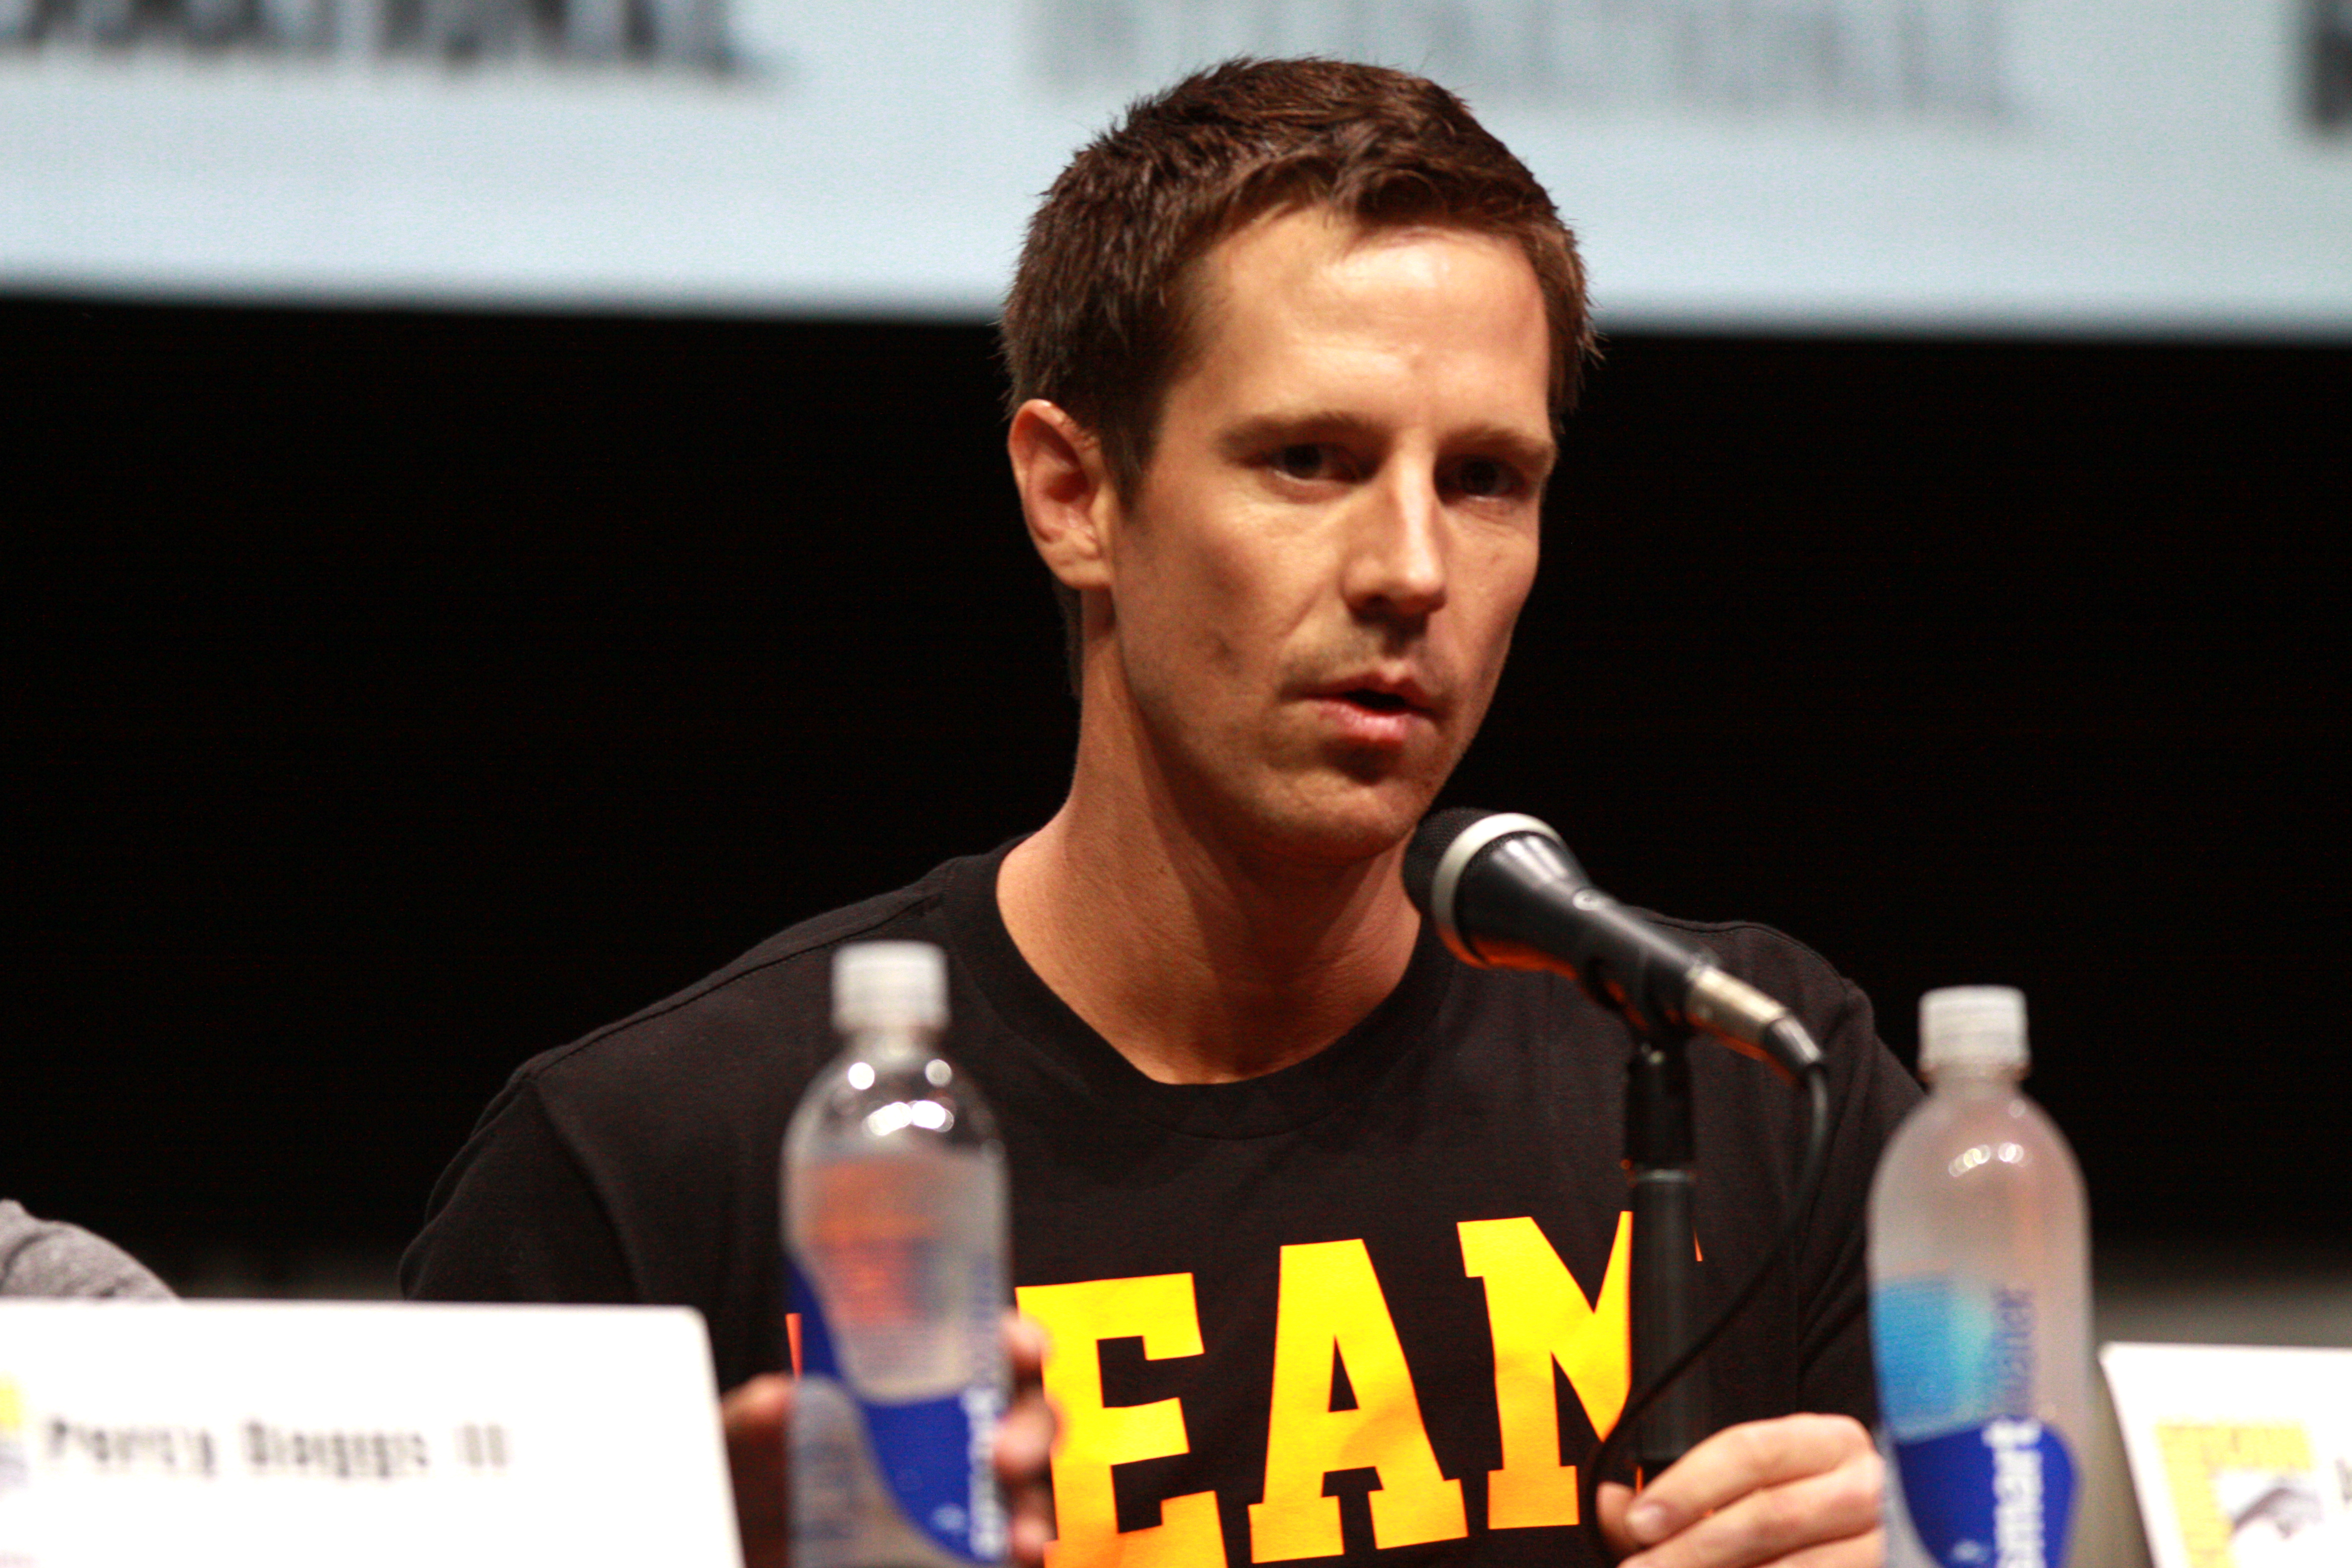 quotes-of-jason-dohring